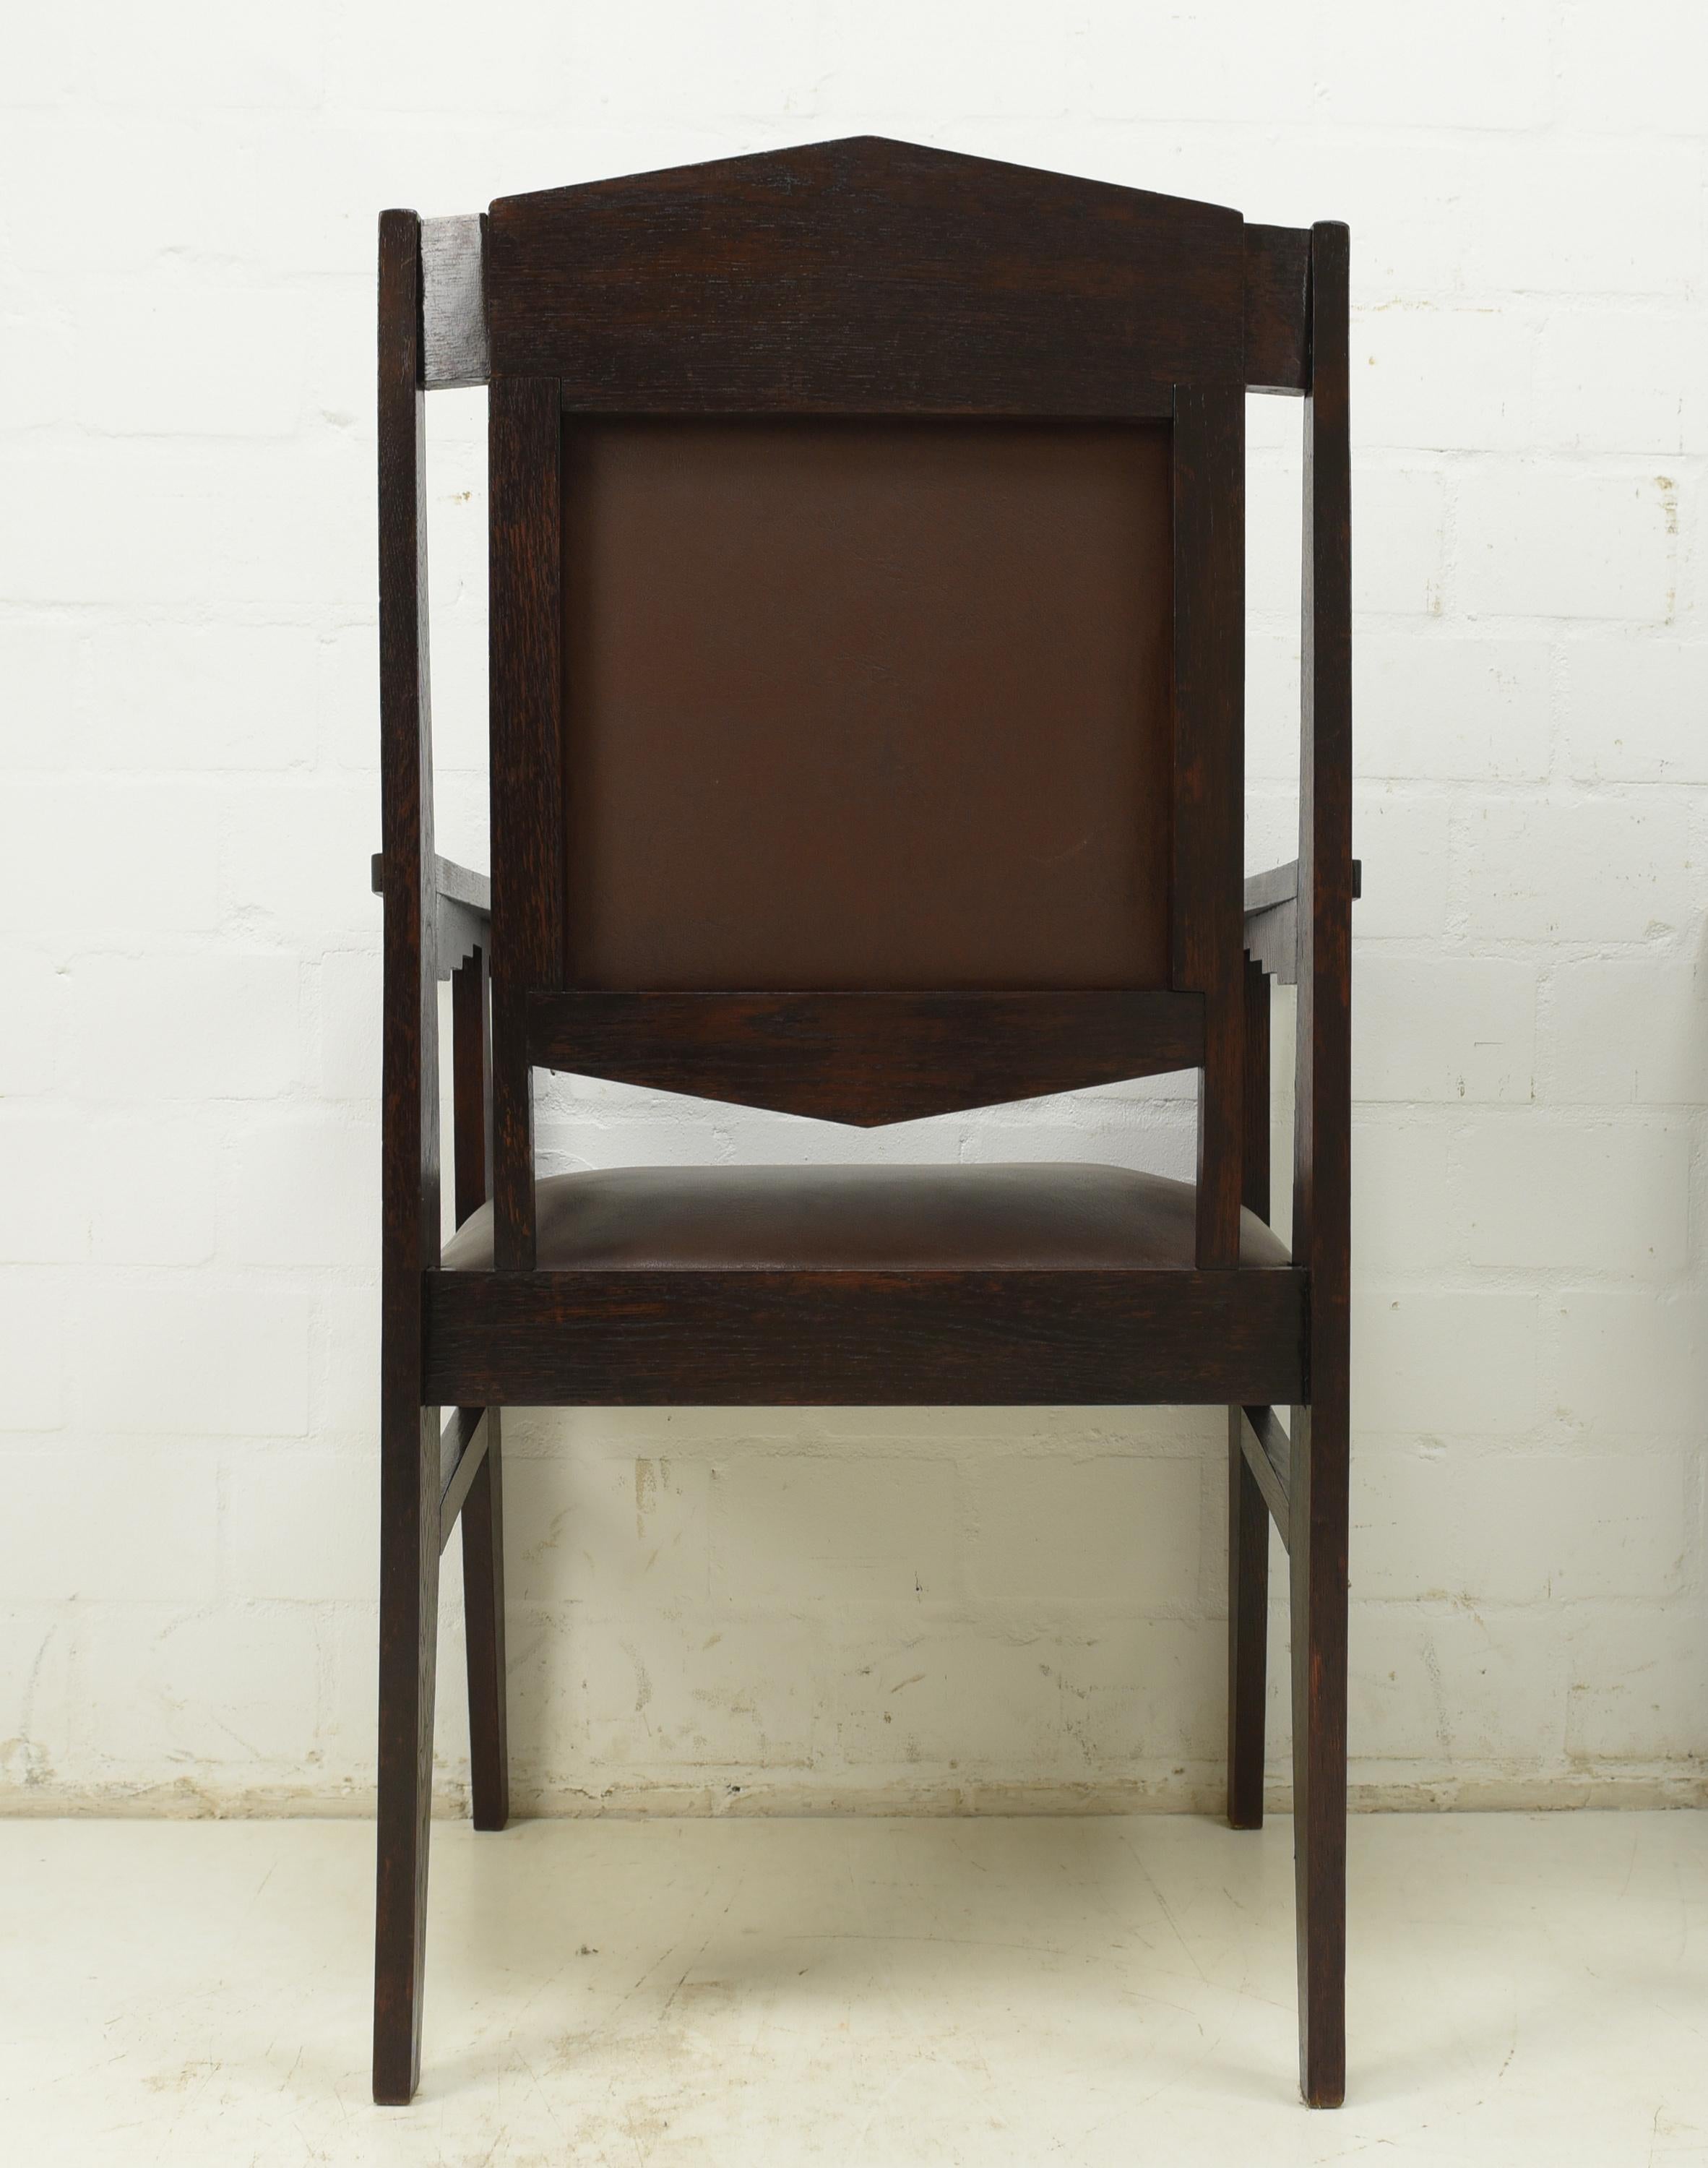 Pair of Art Deco Armchair Desk Chairs in Solid Oak, 1925 For Sale 3